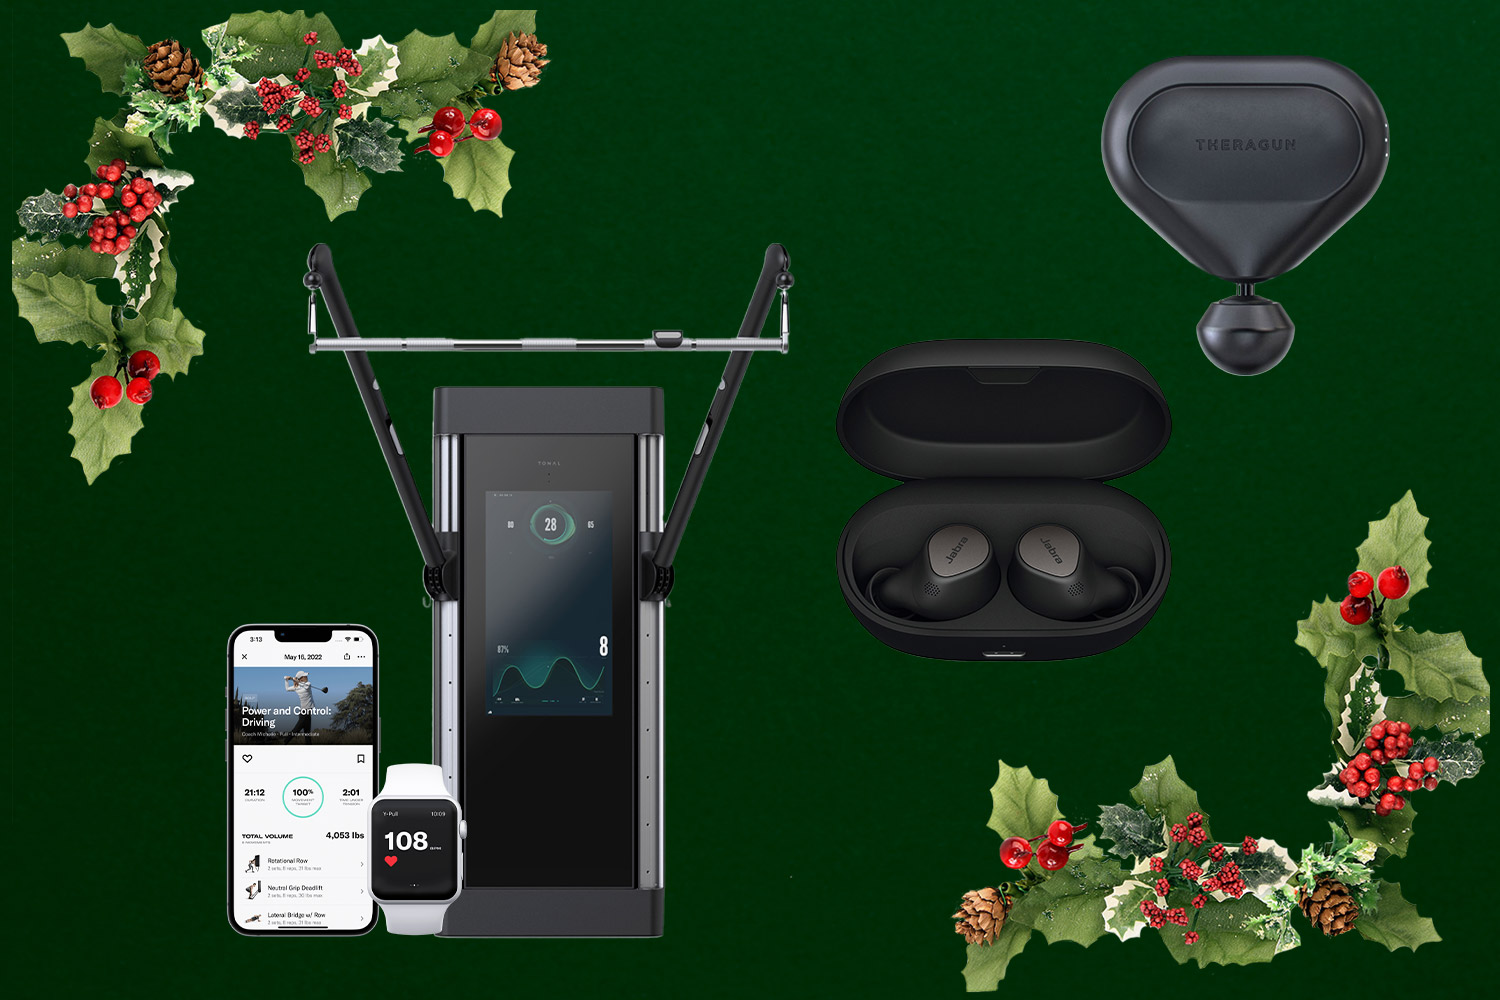 An at home workout device, wireless headphones and handheld massager on a green background